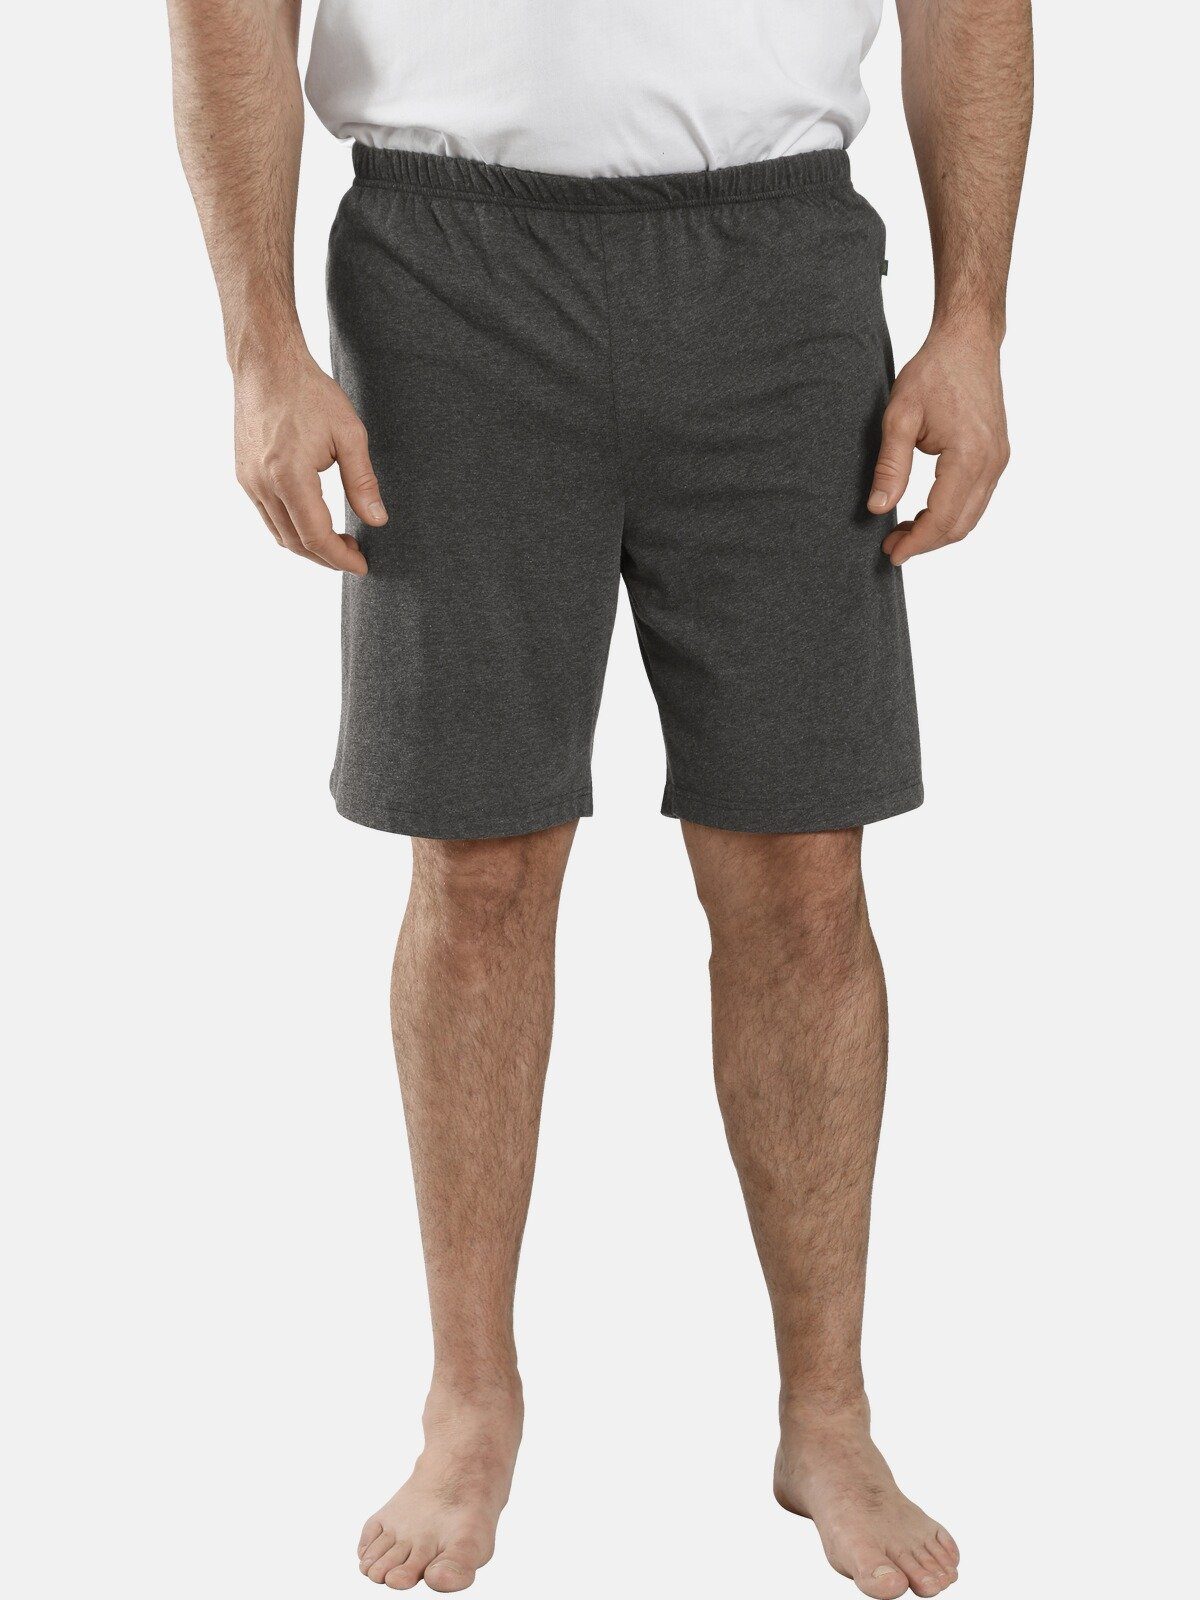 Charles Colby Schlafhose LORD MYCROFT leichte bequeme Relaxshorts dunkelgrau